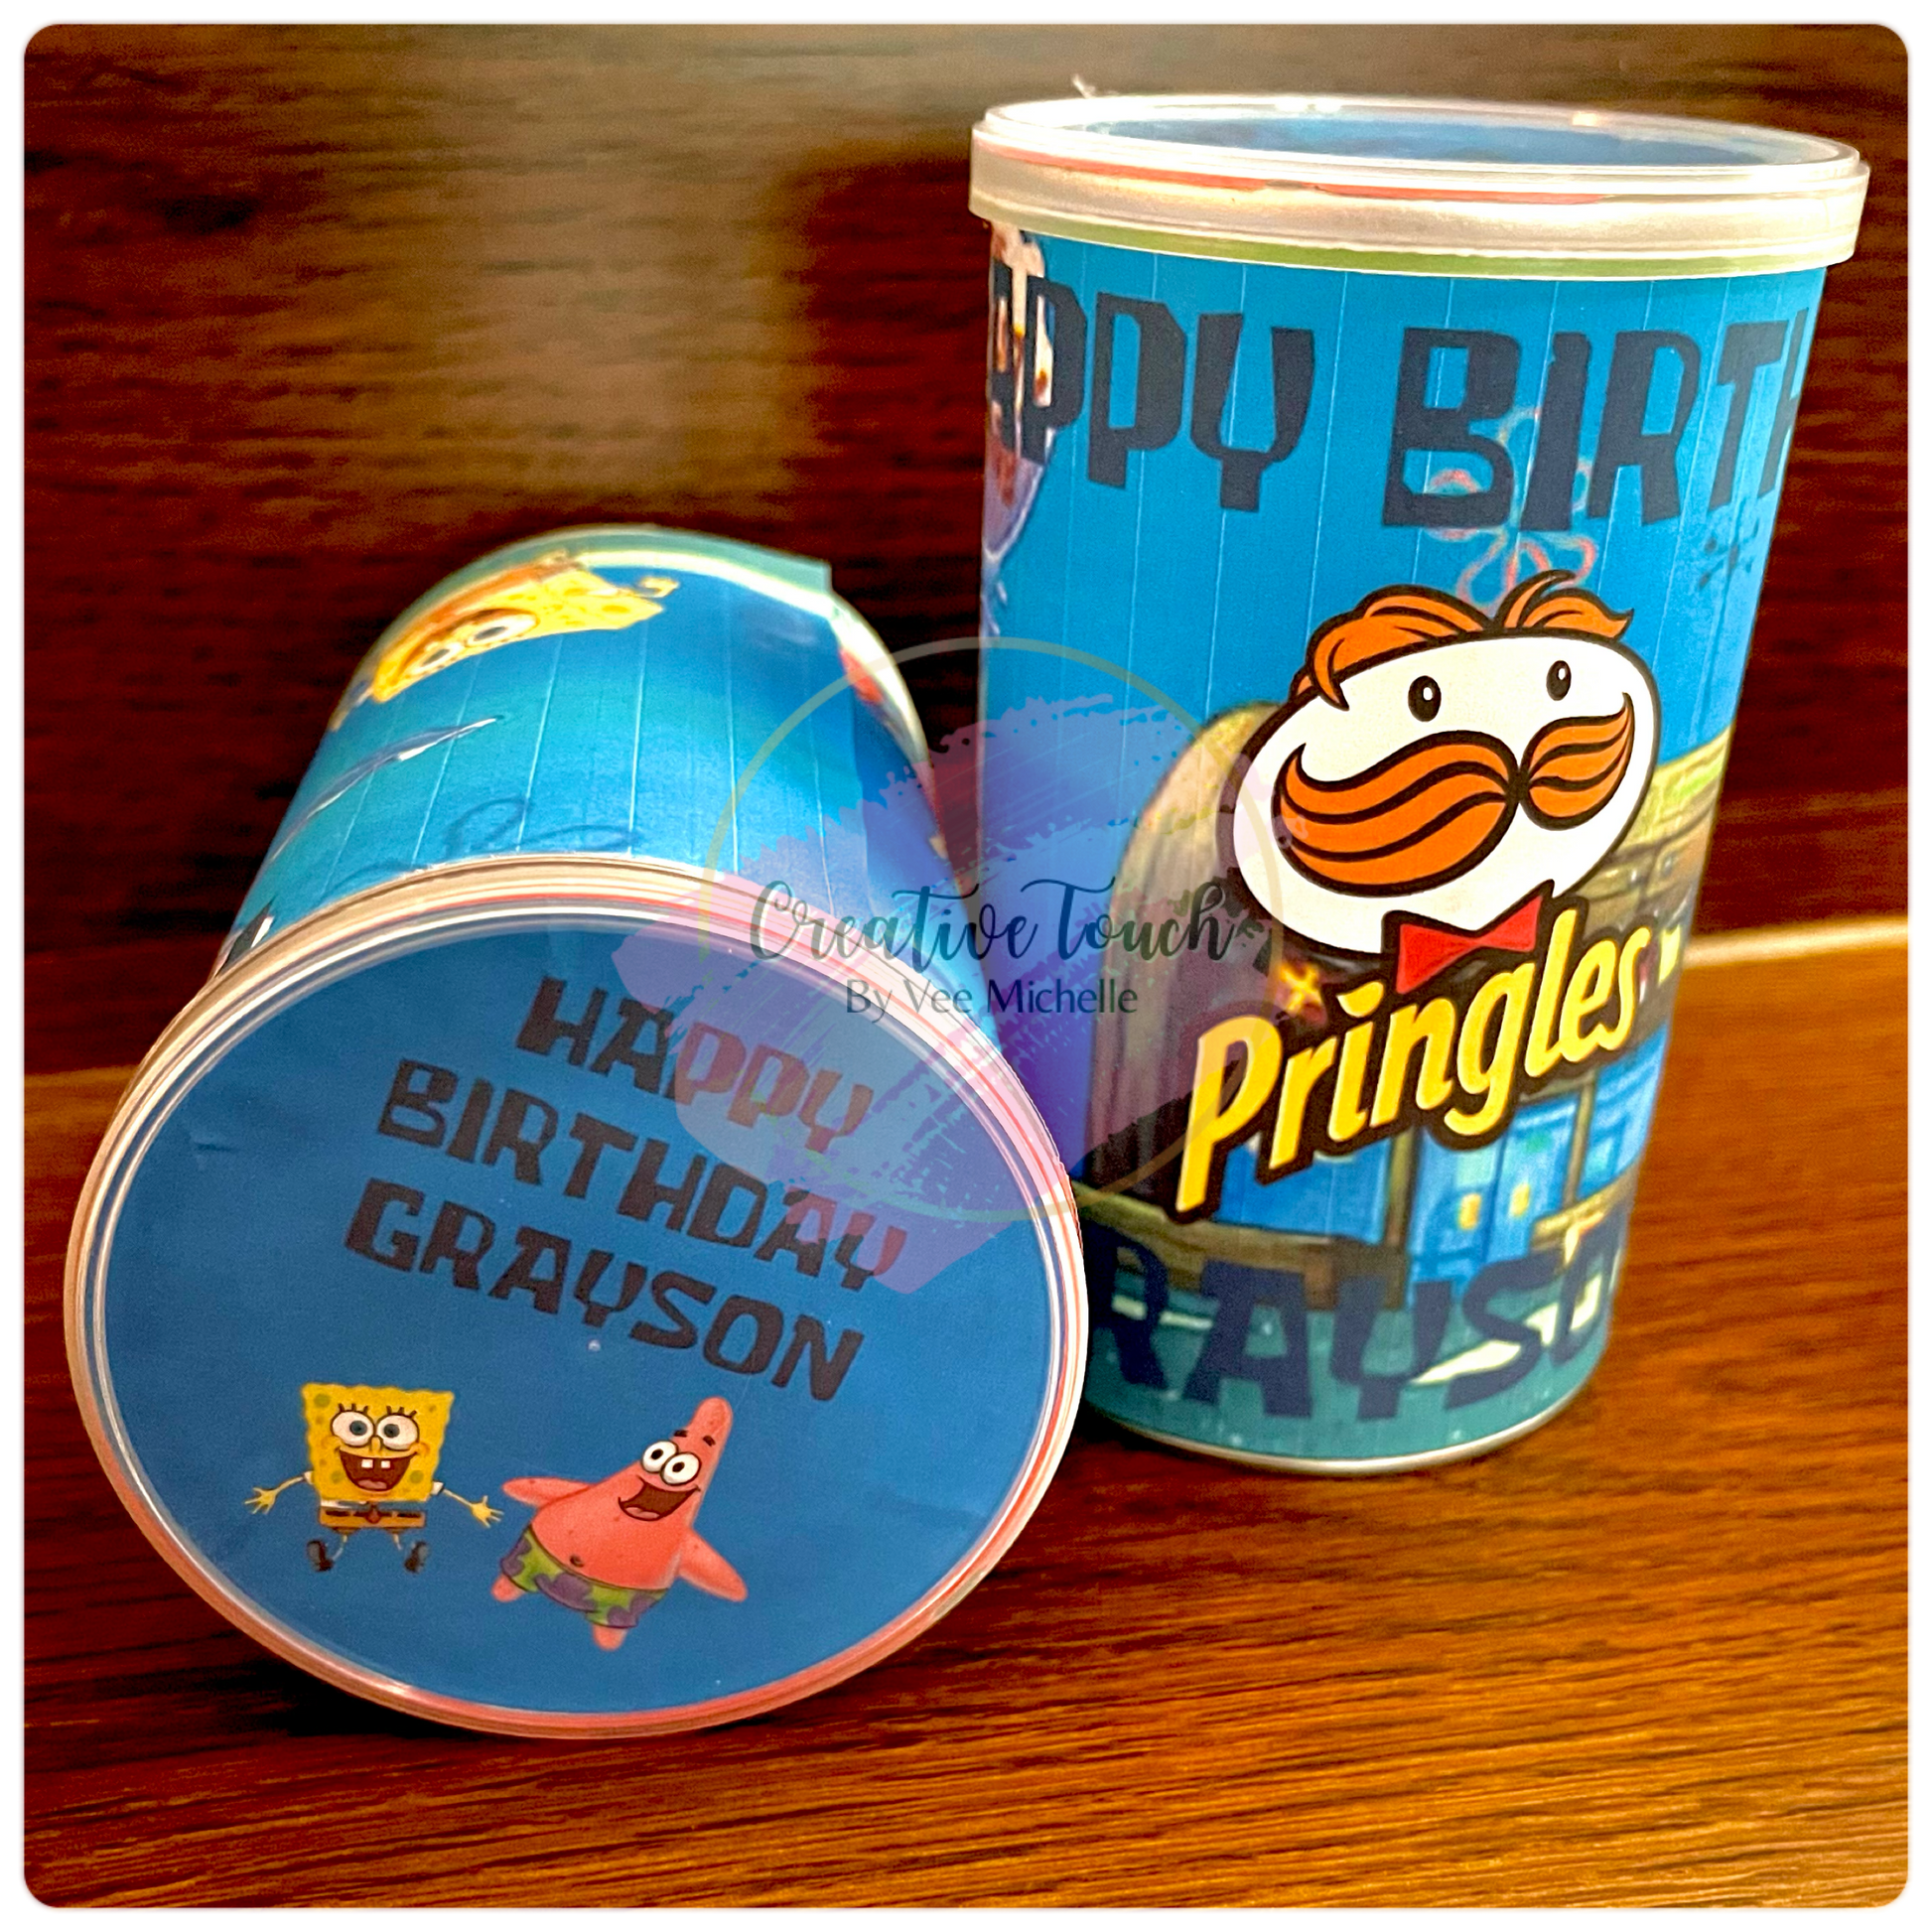 Custom Pringles Labels – Creative Touch By Vee Michelle